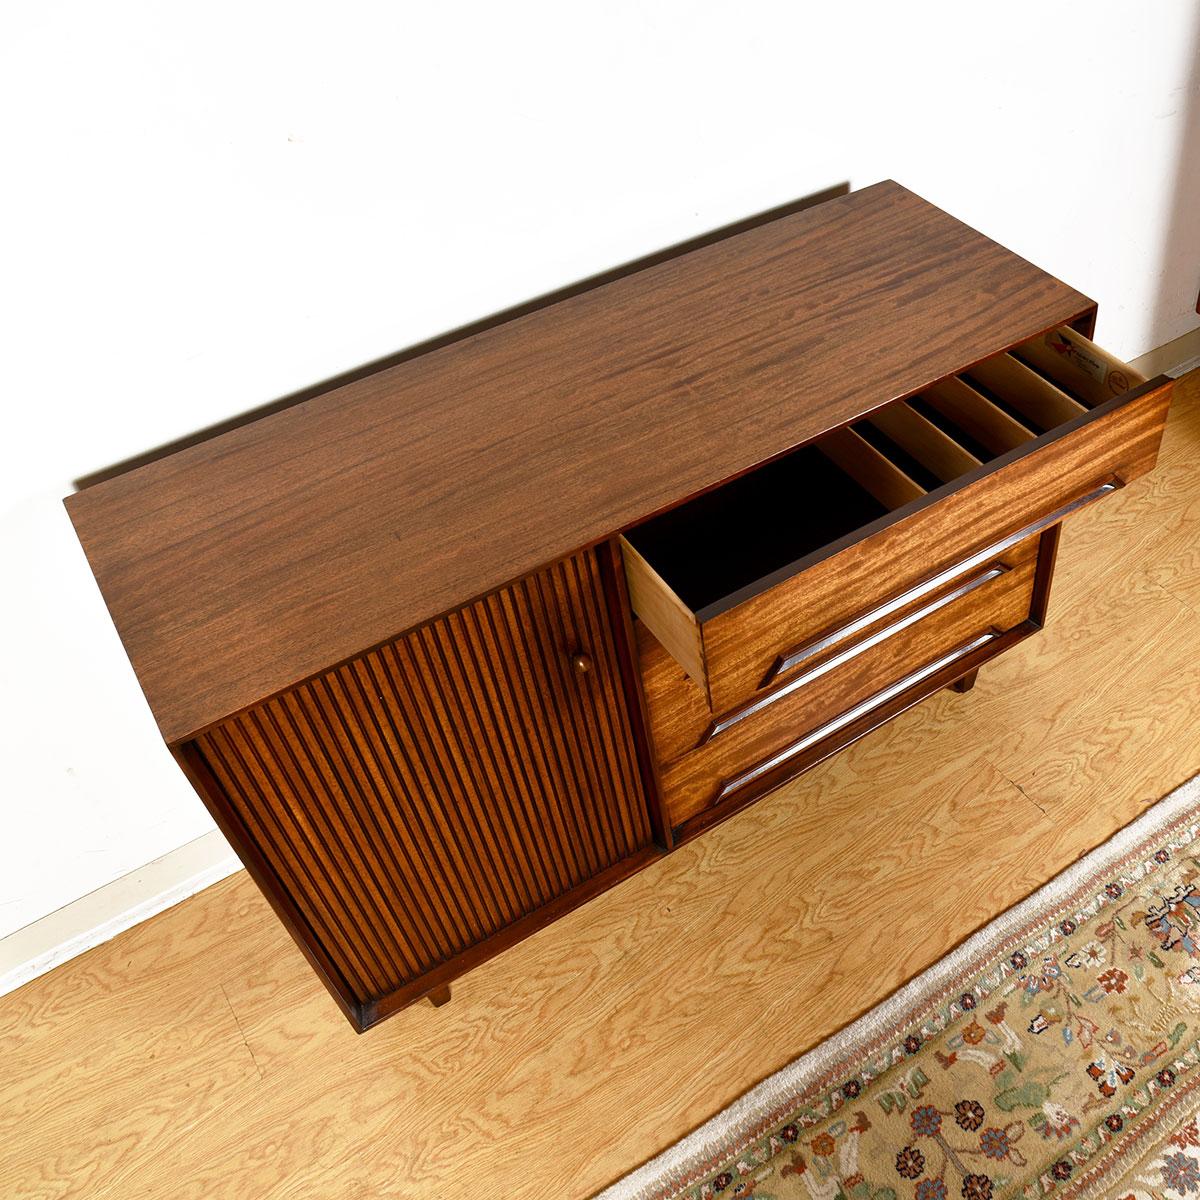 Mid-Century Modern Exotic Mindoro Wood Cabinet by Milo Baughman for Drexel Perspective, 1951 For Sale